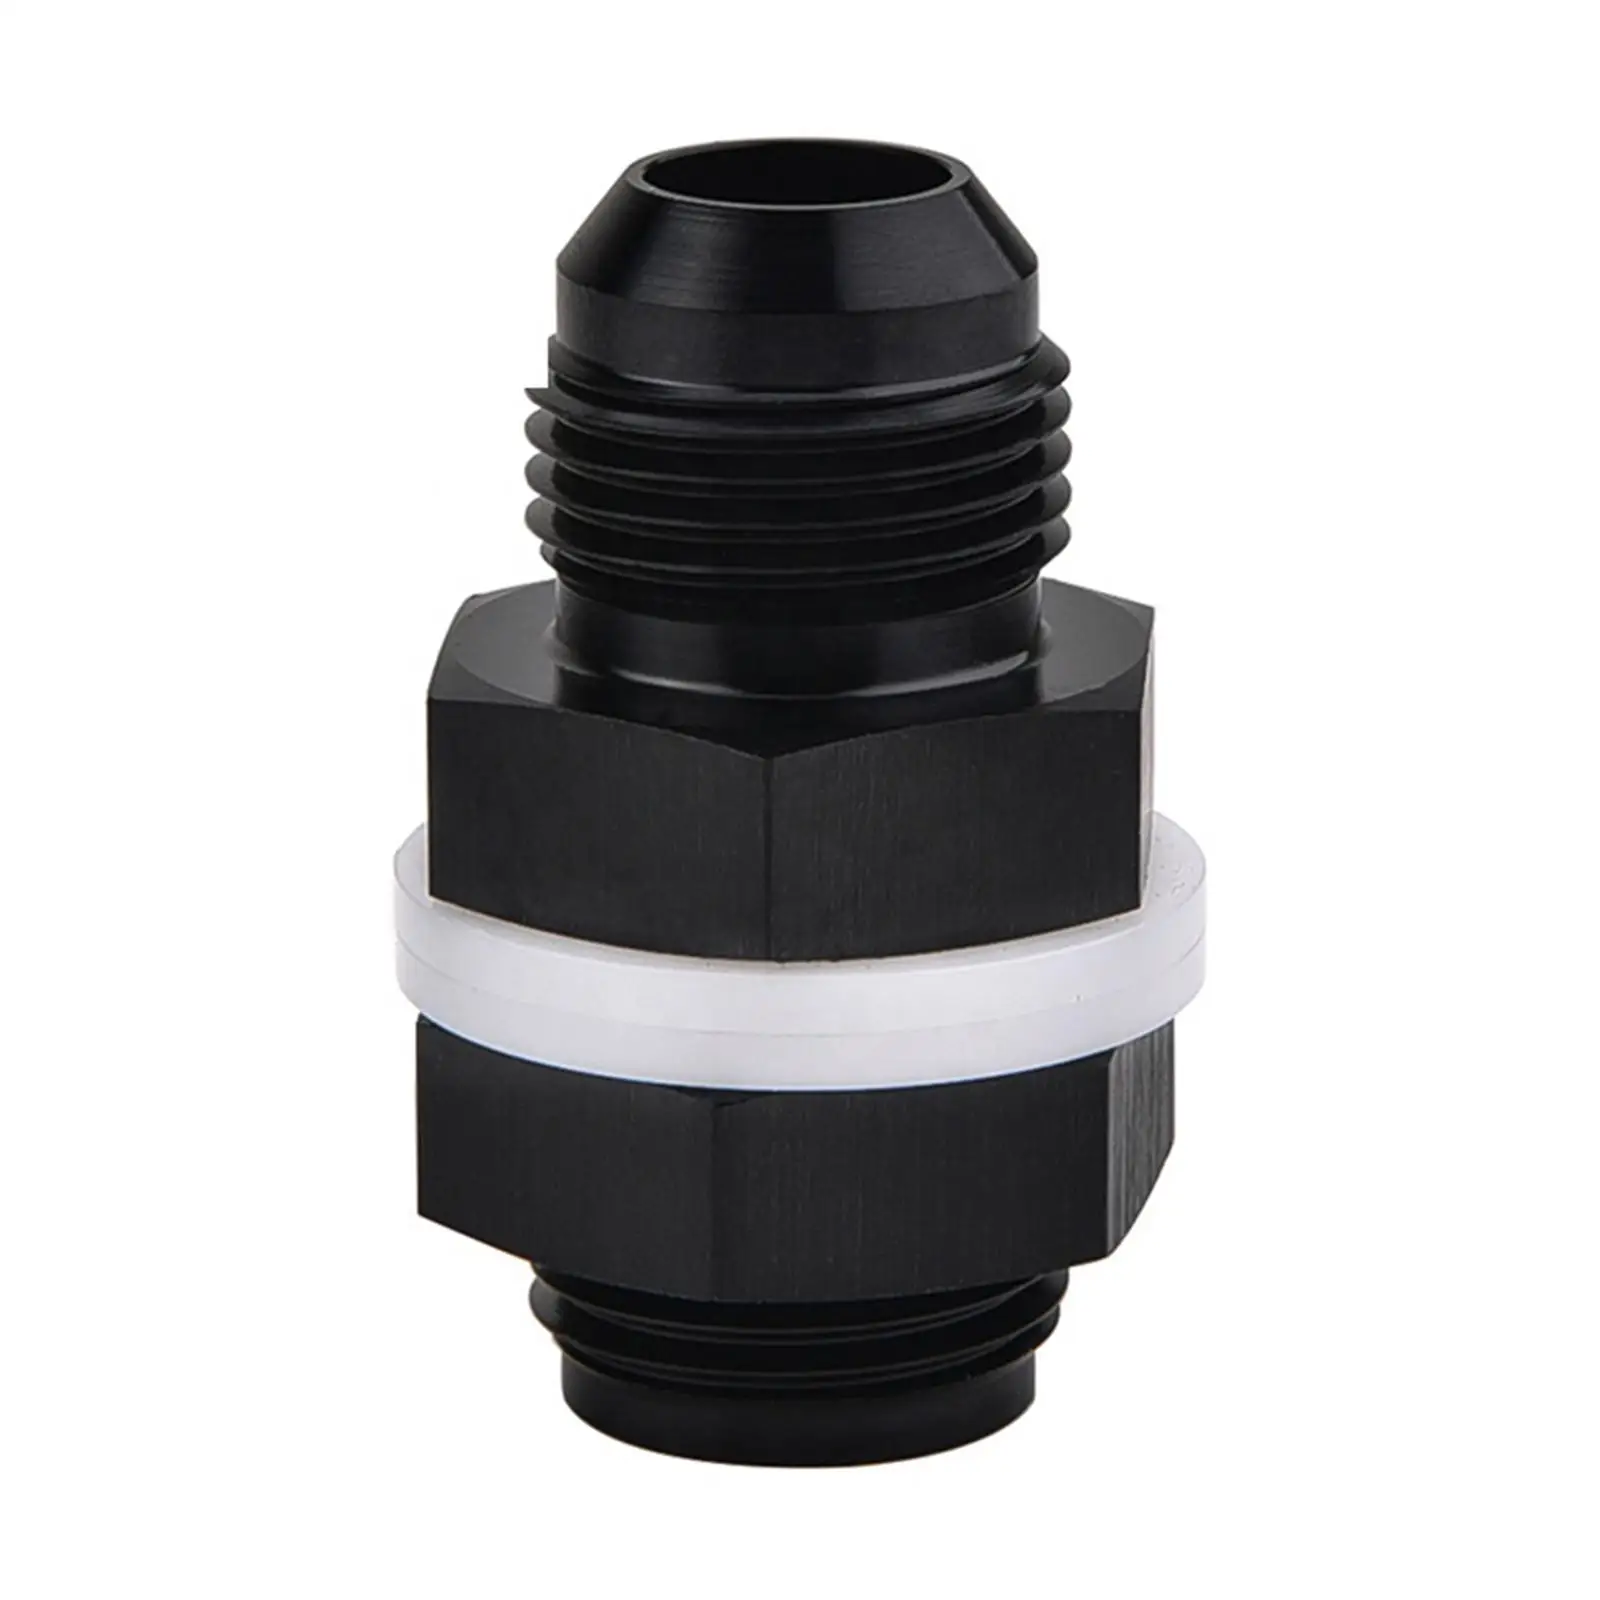 Fuel Cell Bulkhead Fitting Adapter with Washer Black Swivel Adapter Fitting Easy Installation Spare Parts Replace Accessory